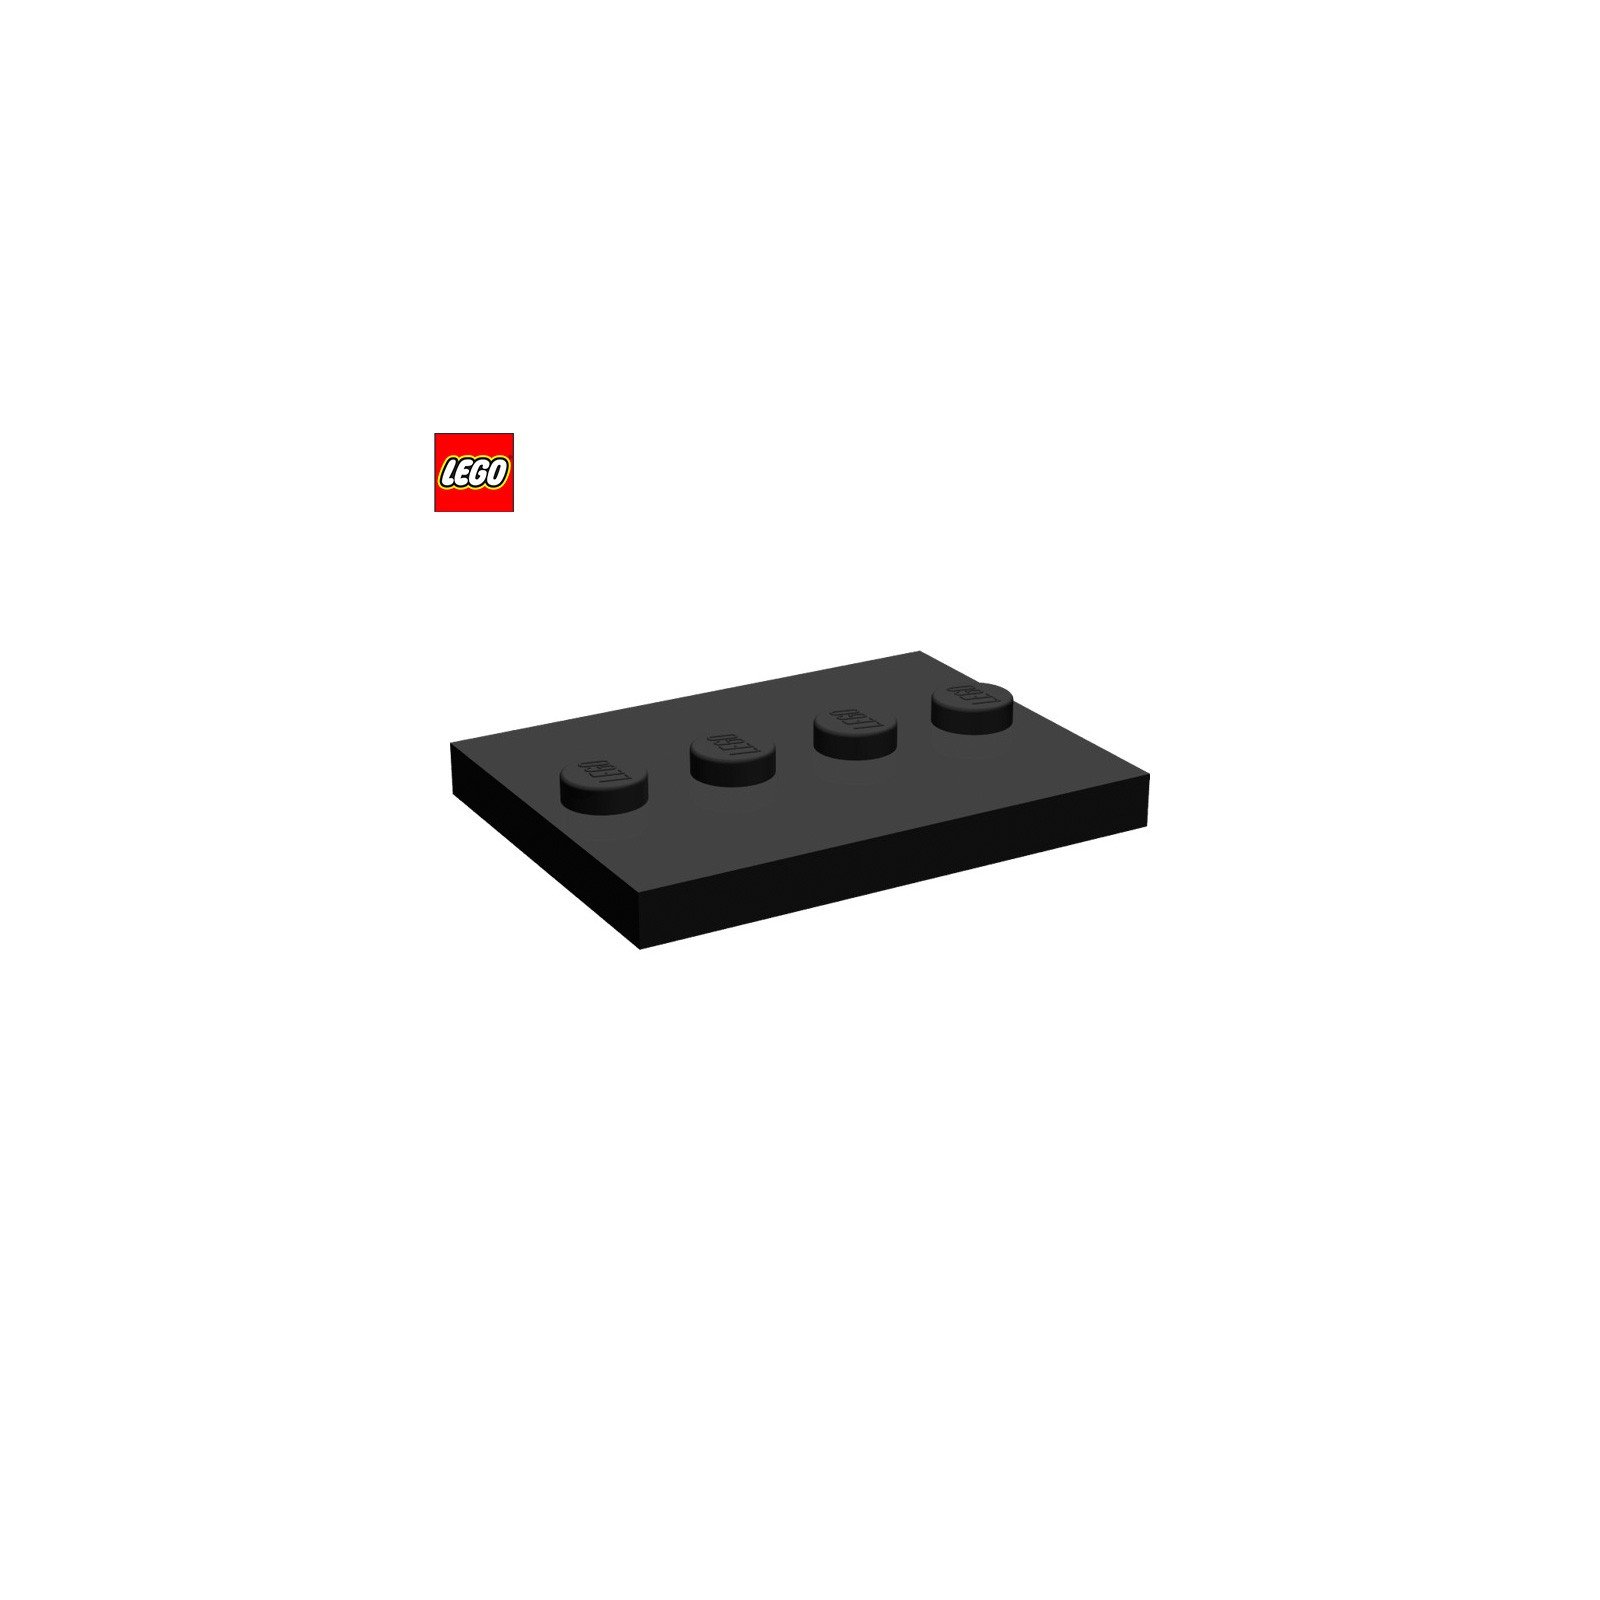 Tile special 4 x 3 with 4 studs in centre - LEGO® 88646